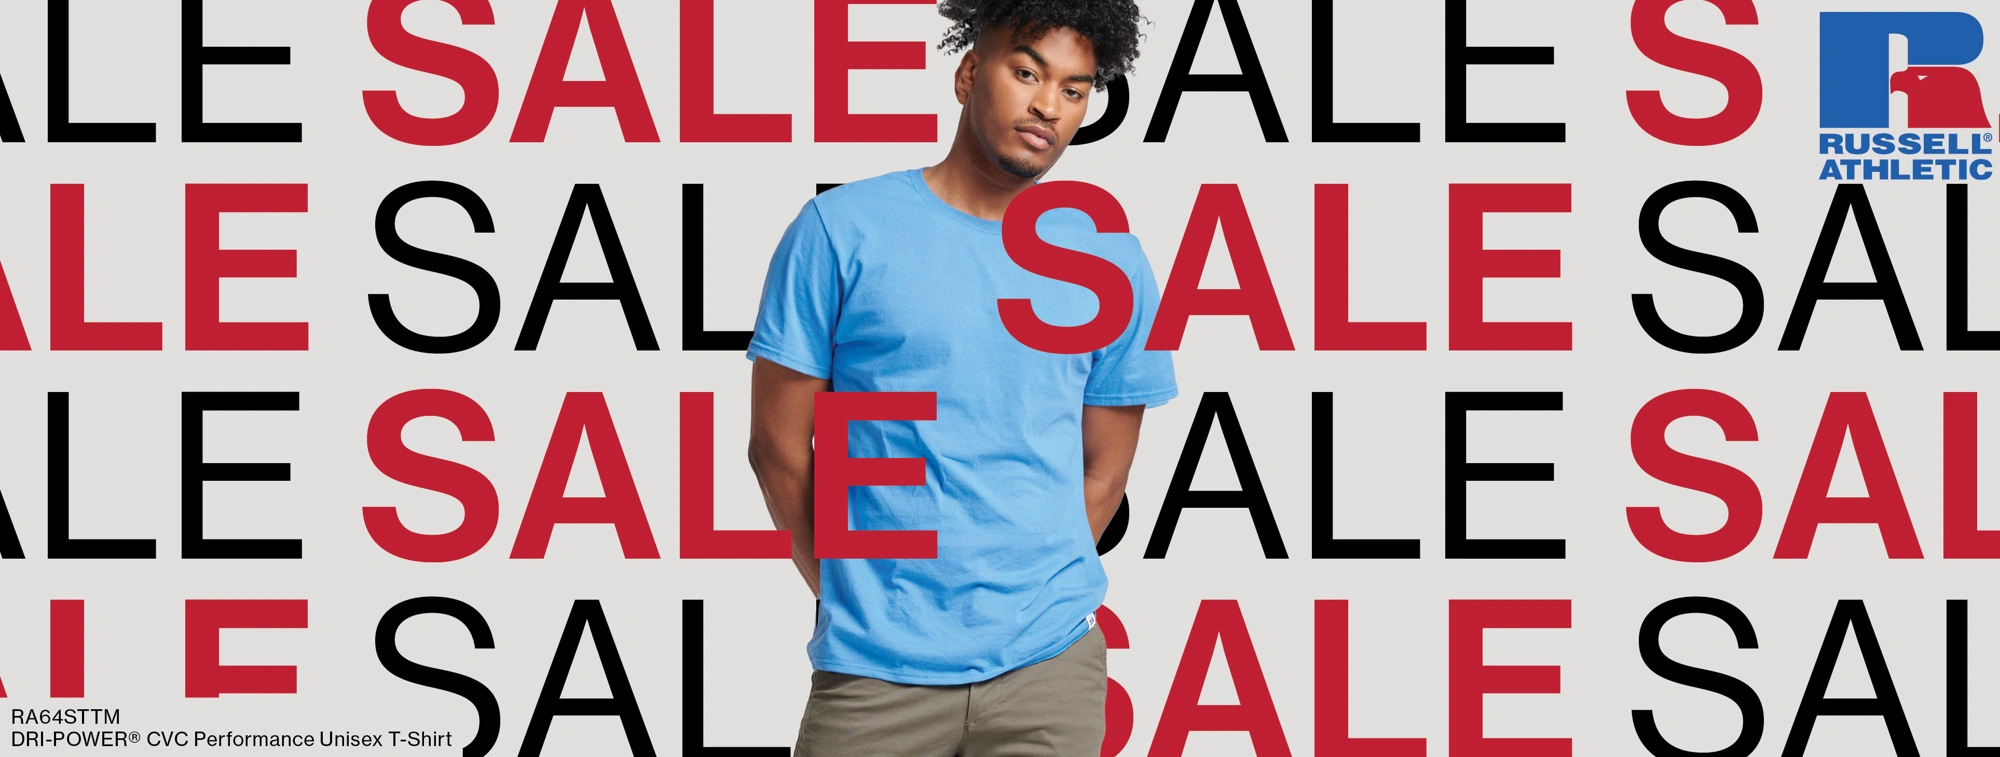 Russell Athletic Tee Sale